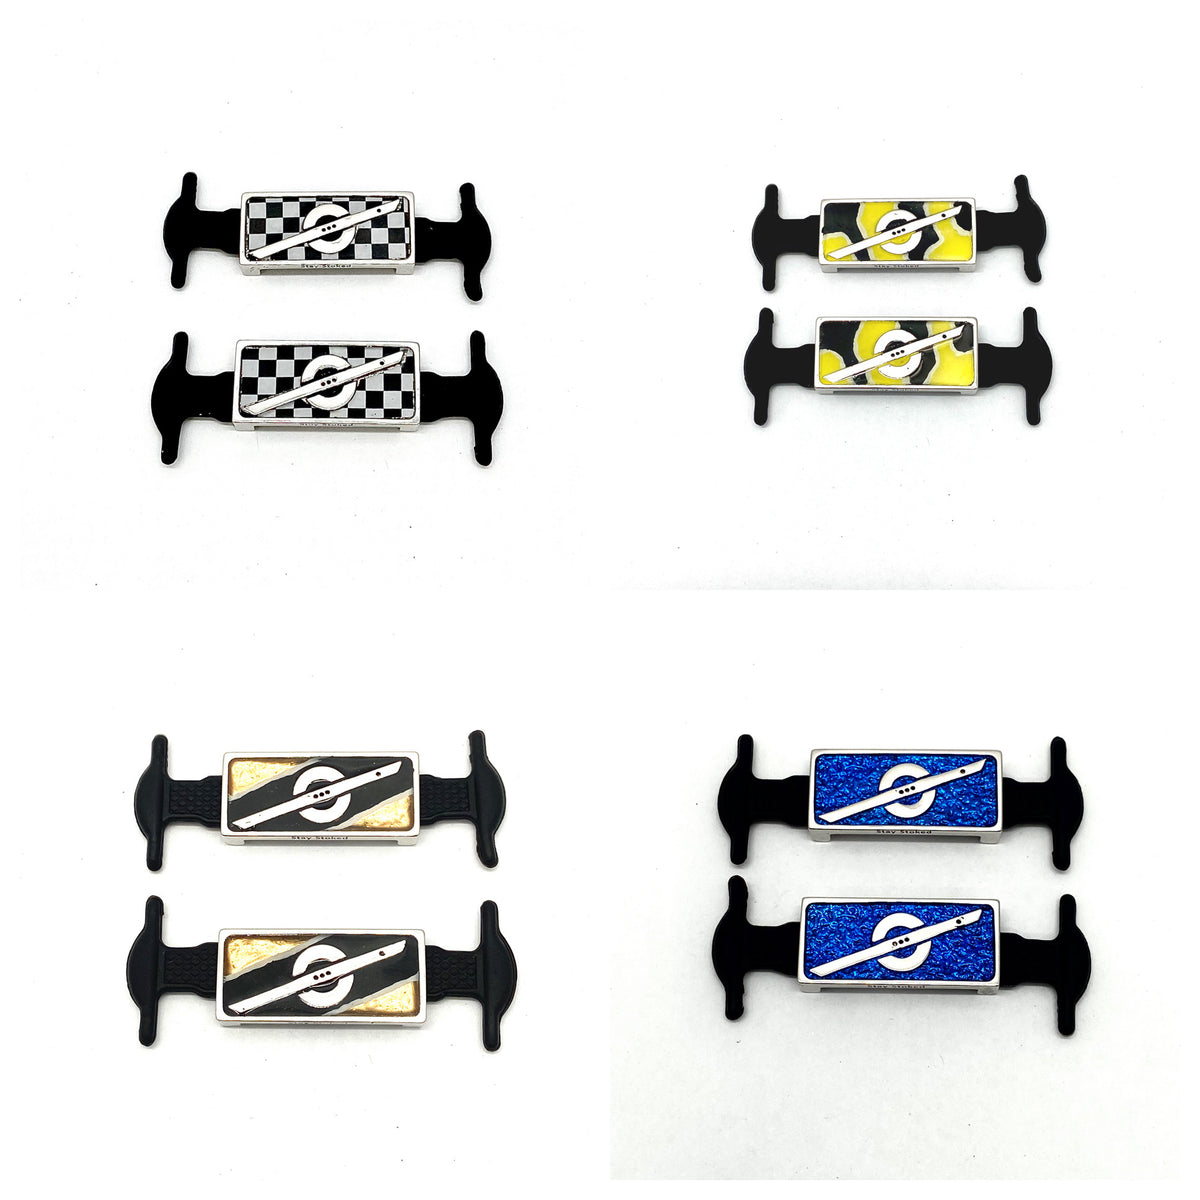 Stoke Saver shoe charms in black and white checkered flag, Julian style, blue electric color, and black and yellow camo